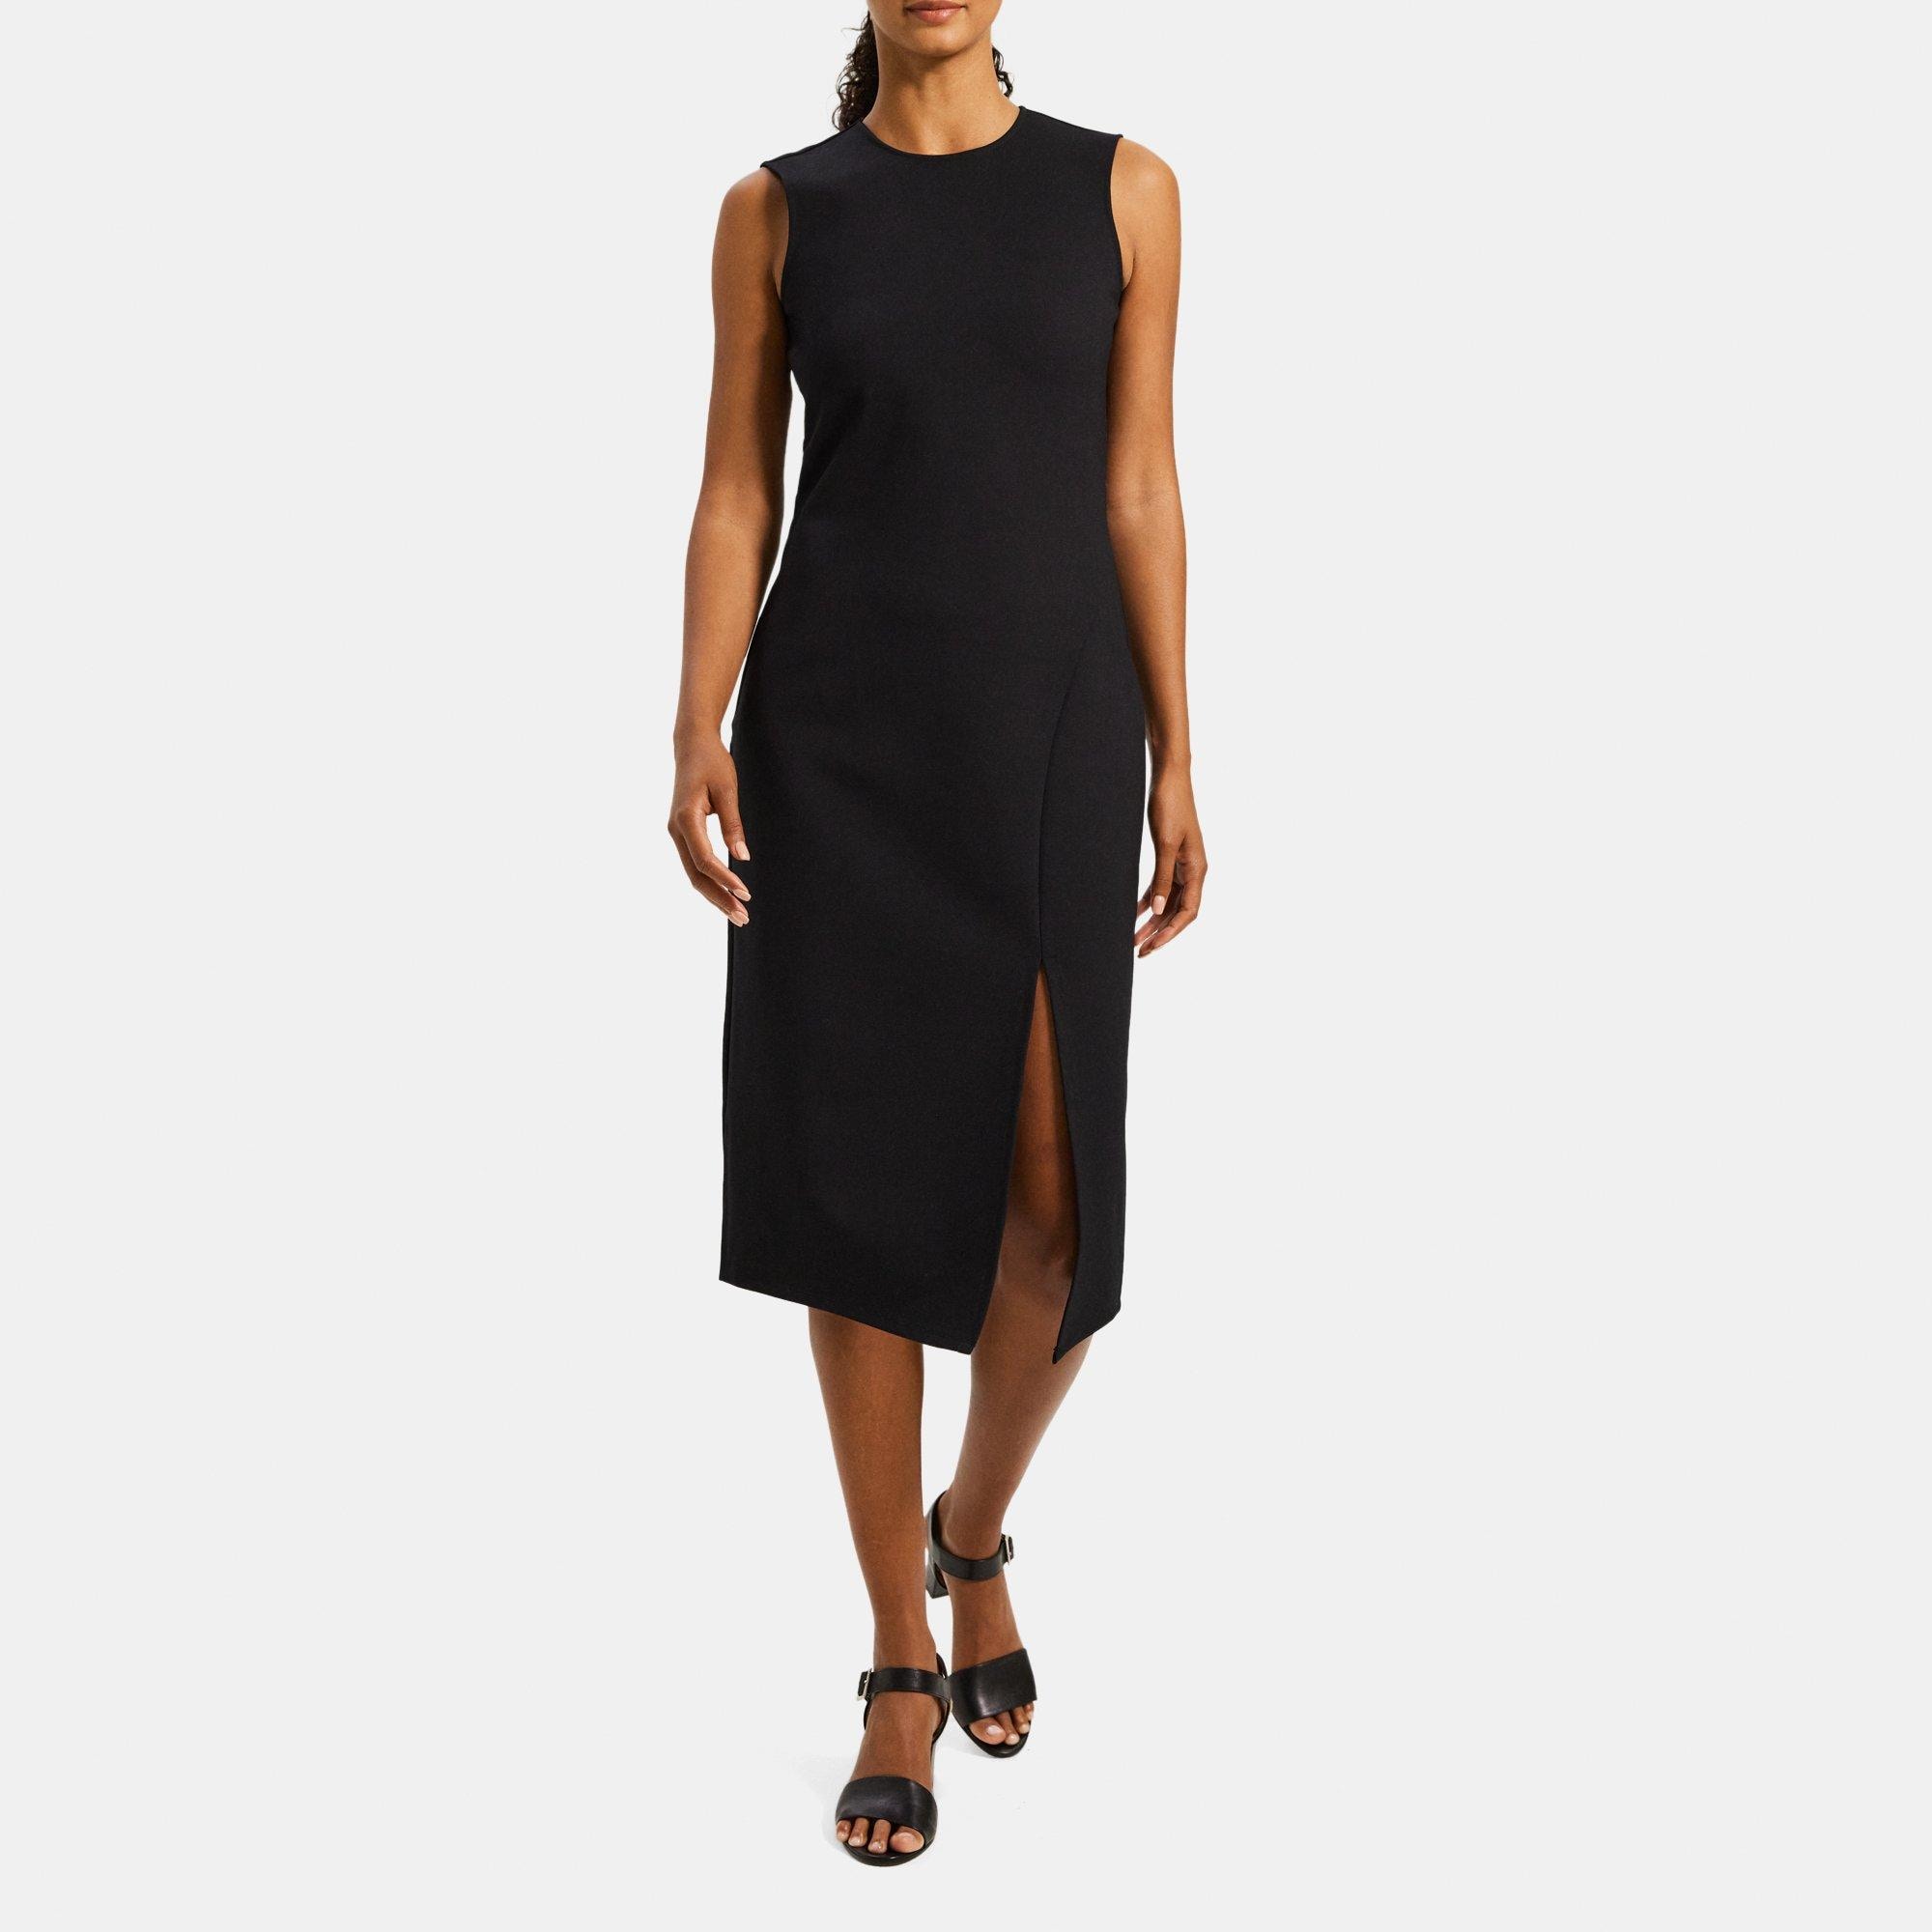 Theory Women's Seam Sculpted Ponte Dress, Black, 0 at